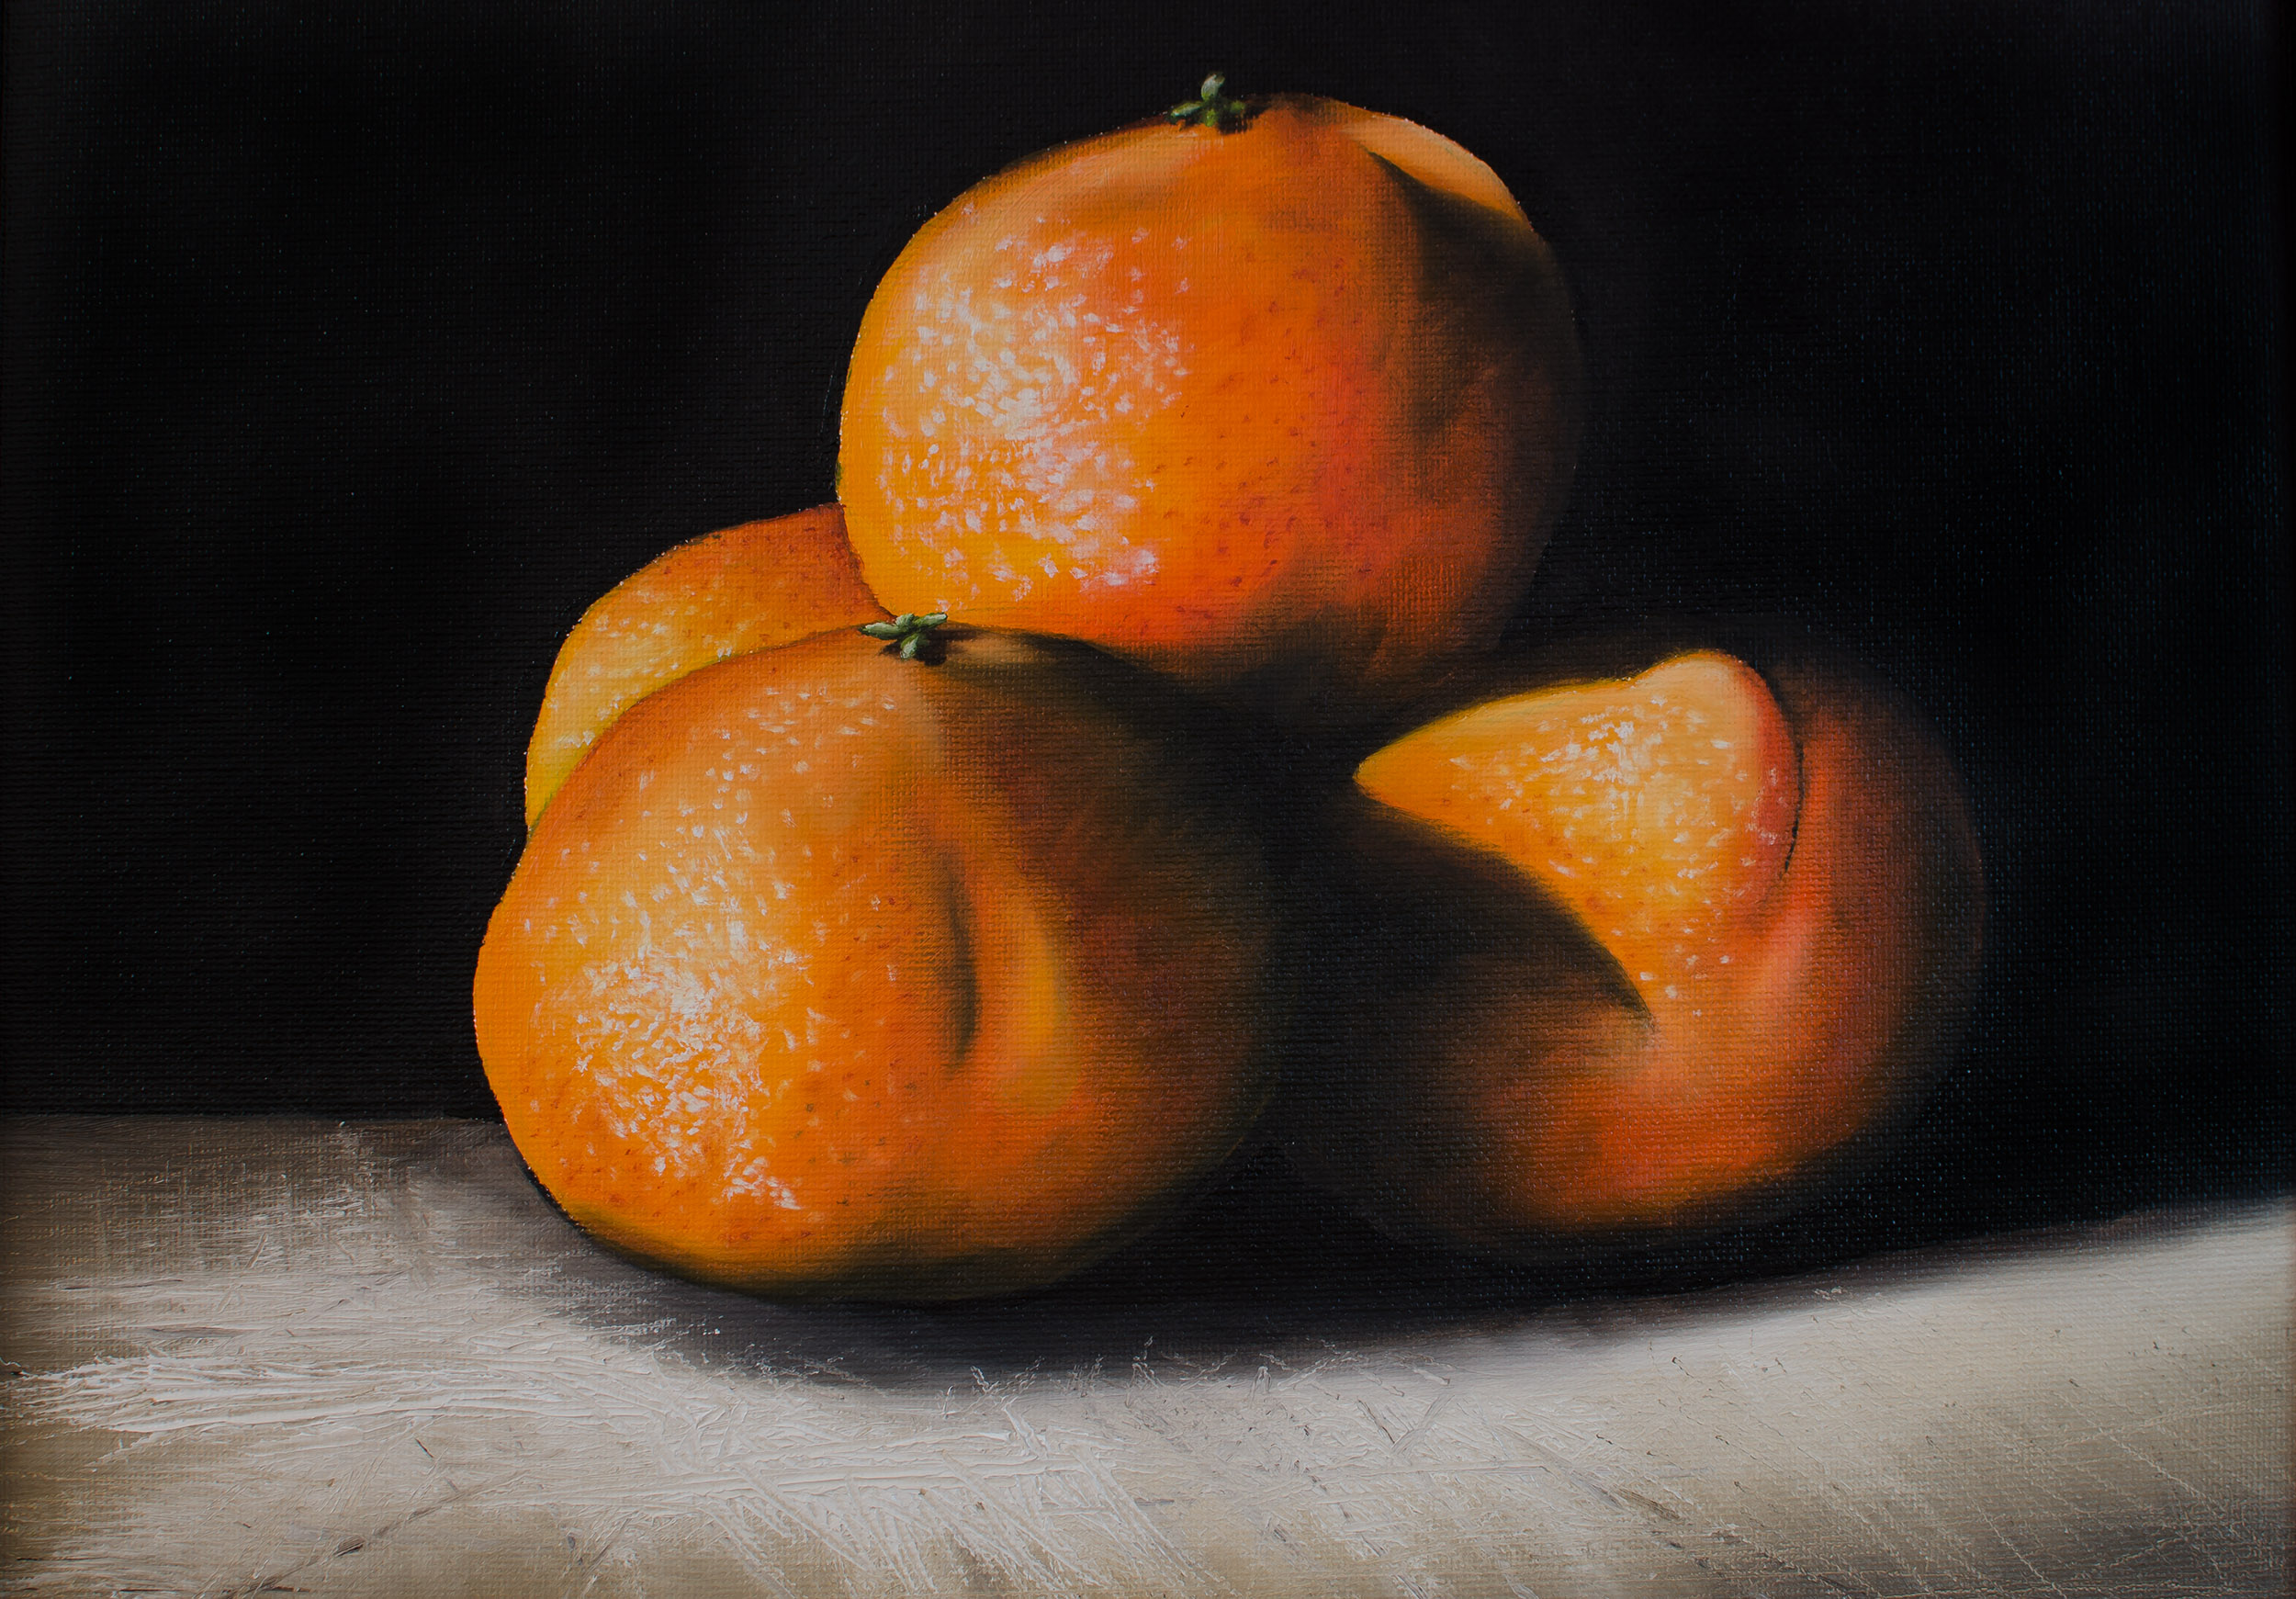   FOUR TANGERINES   Oil on canvas panel, 11x14”, 2015 (Private collection) 